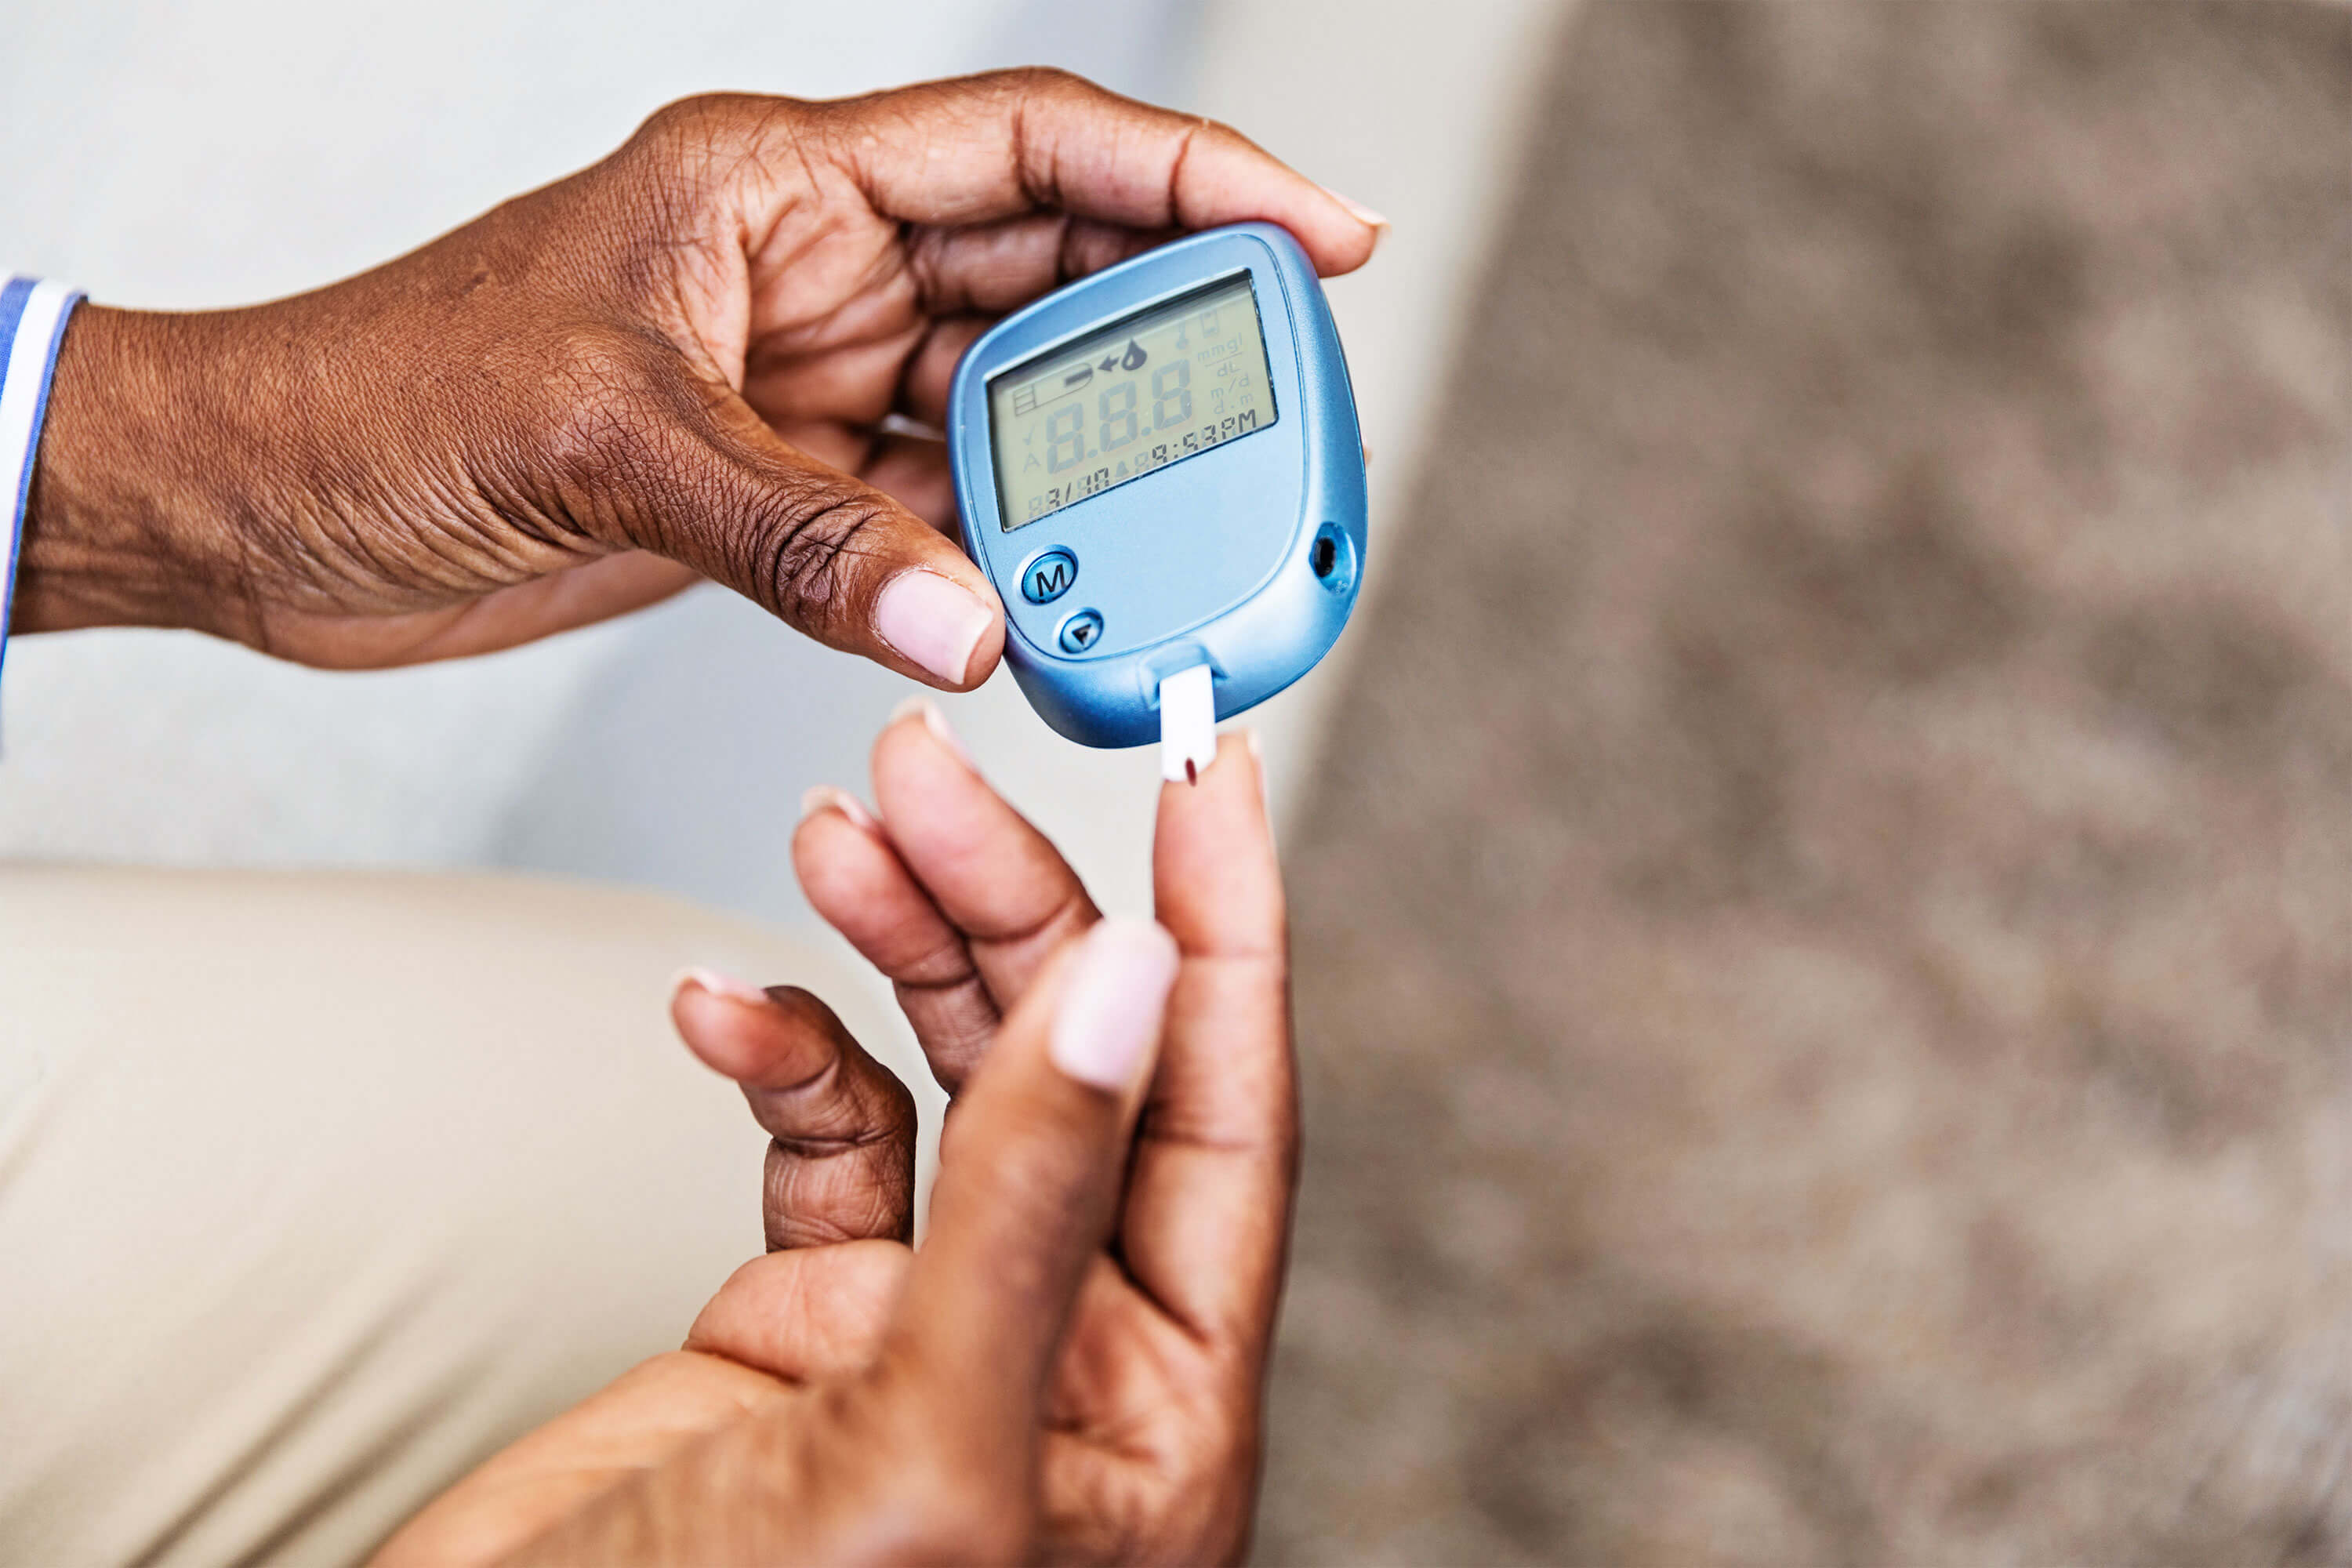 Men at higher risk for diabetes problems than women: Study